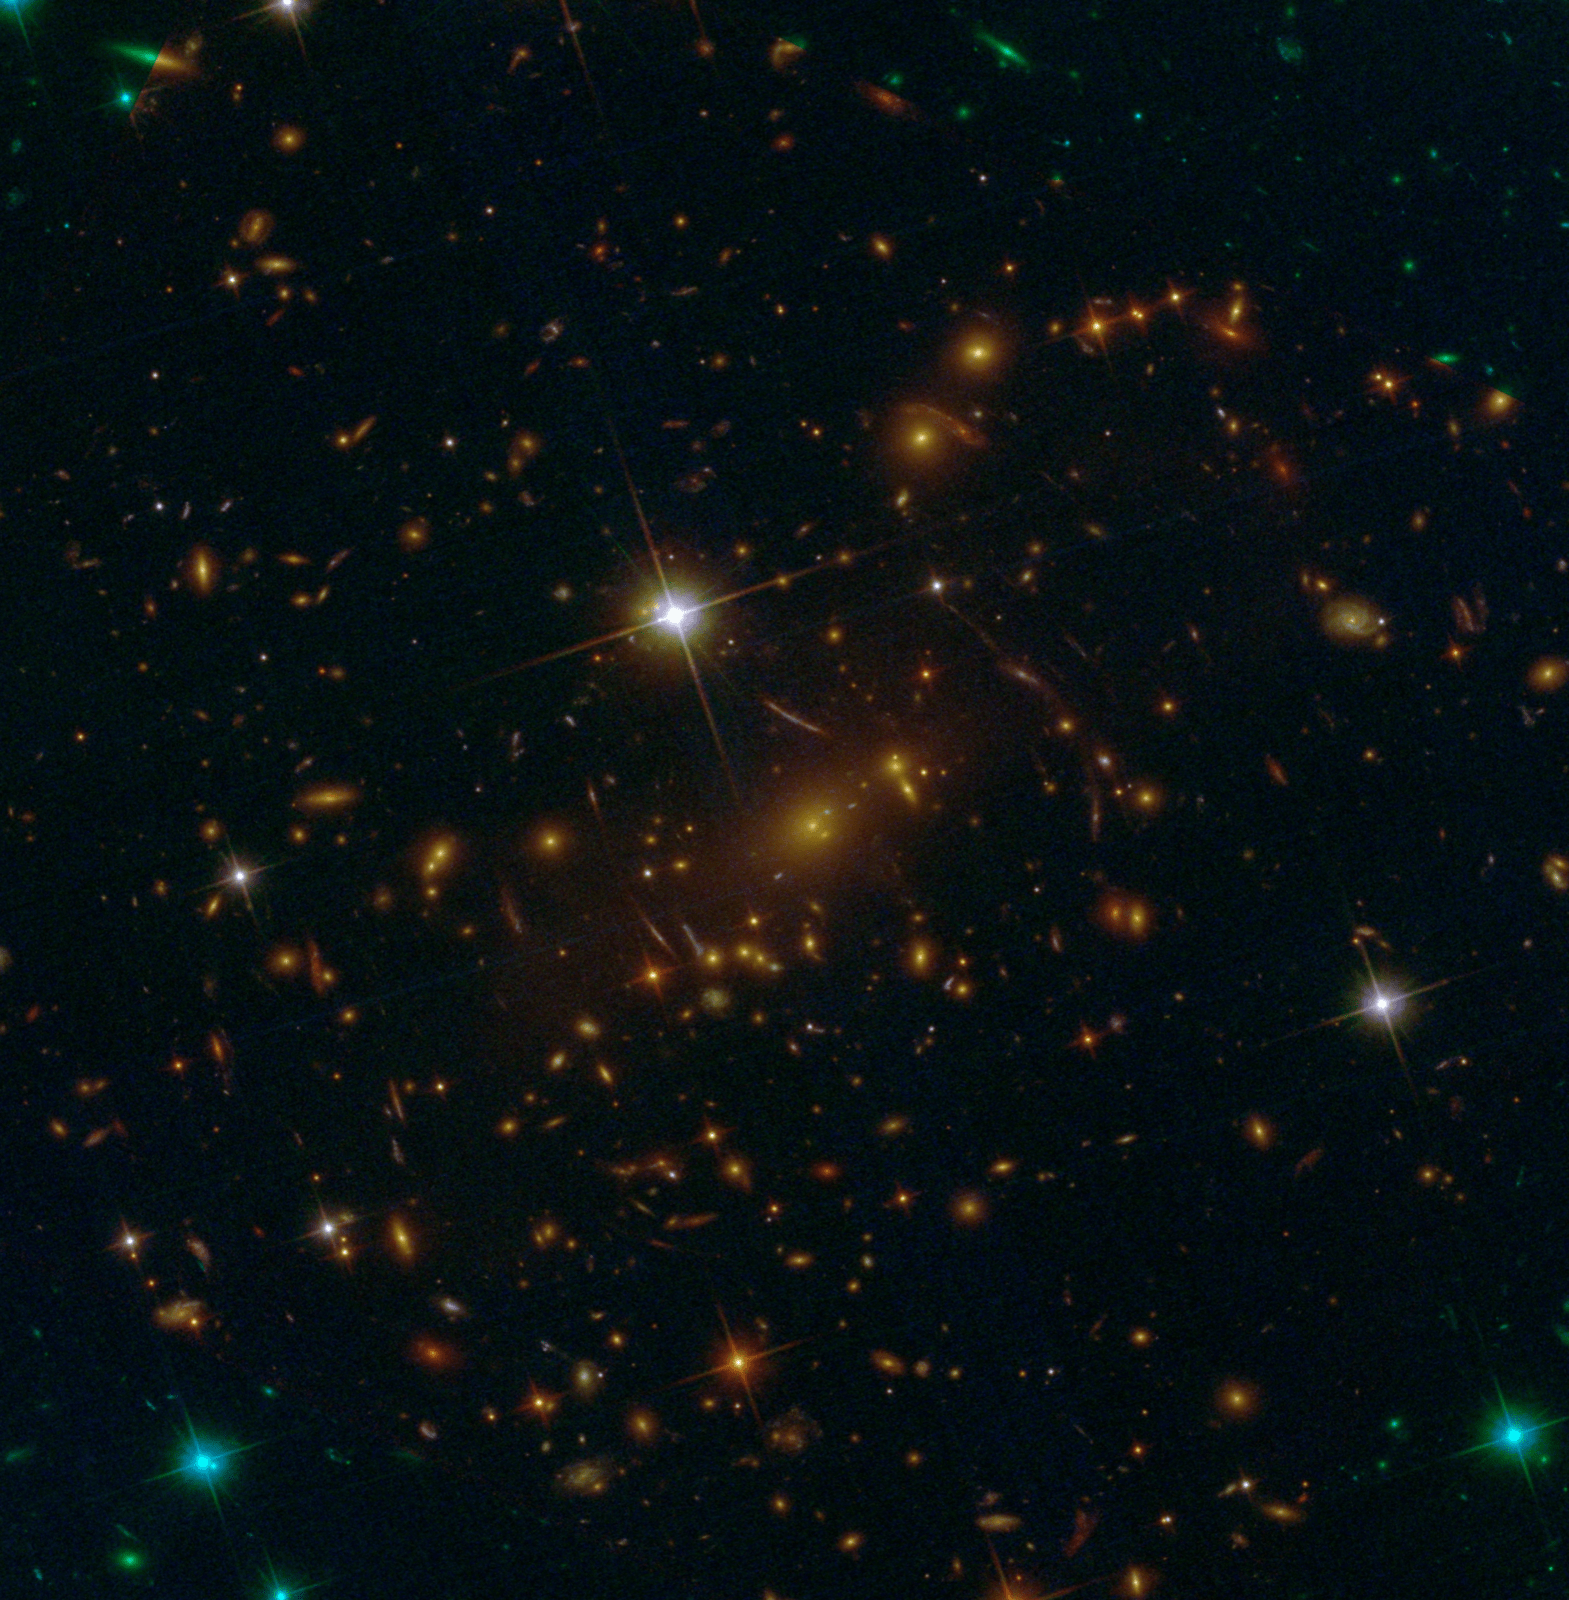 This image, captured by Hubble, shows three stacked, filtered views of galaxy cluster SMACS 0723 as captured by two of Hubble’s instruments. An infrared view of the galaxy cluster is on top of the stack. Only the edges of the bottom two layers of the stack are visible, like messily stacked papers. There is one layer that is identifiable by its green filters and another by its blue filters. The background is dark with many galaxies scattered across it.